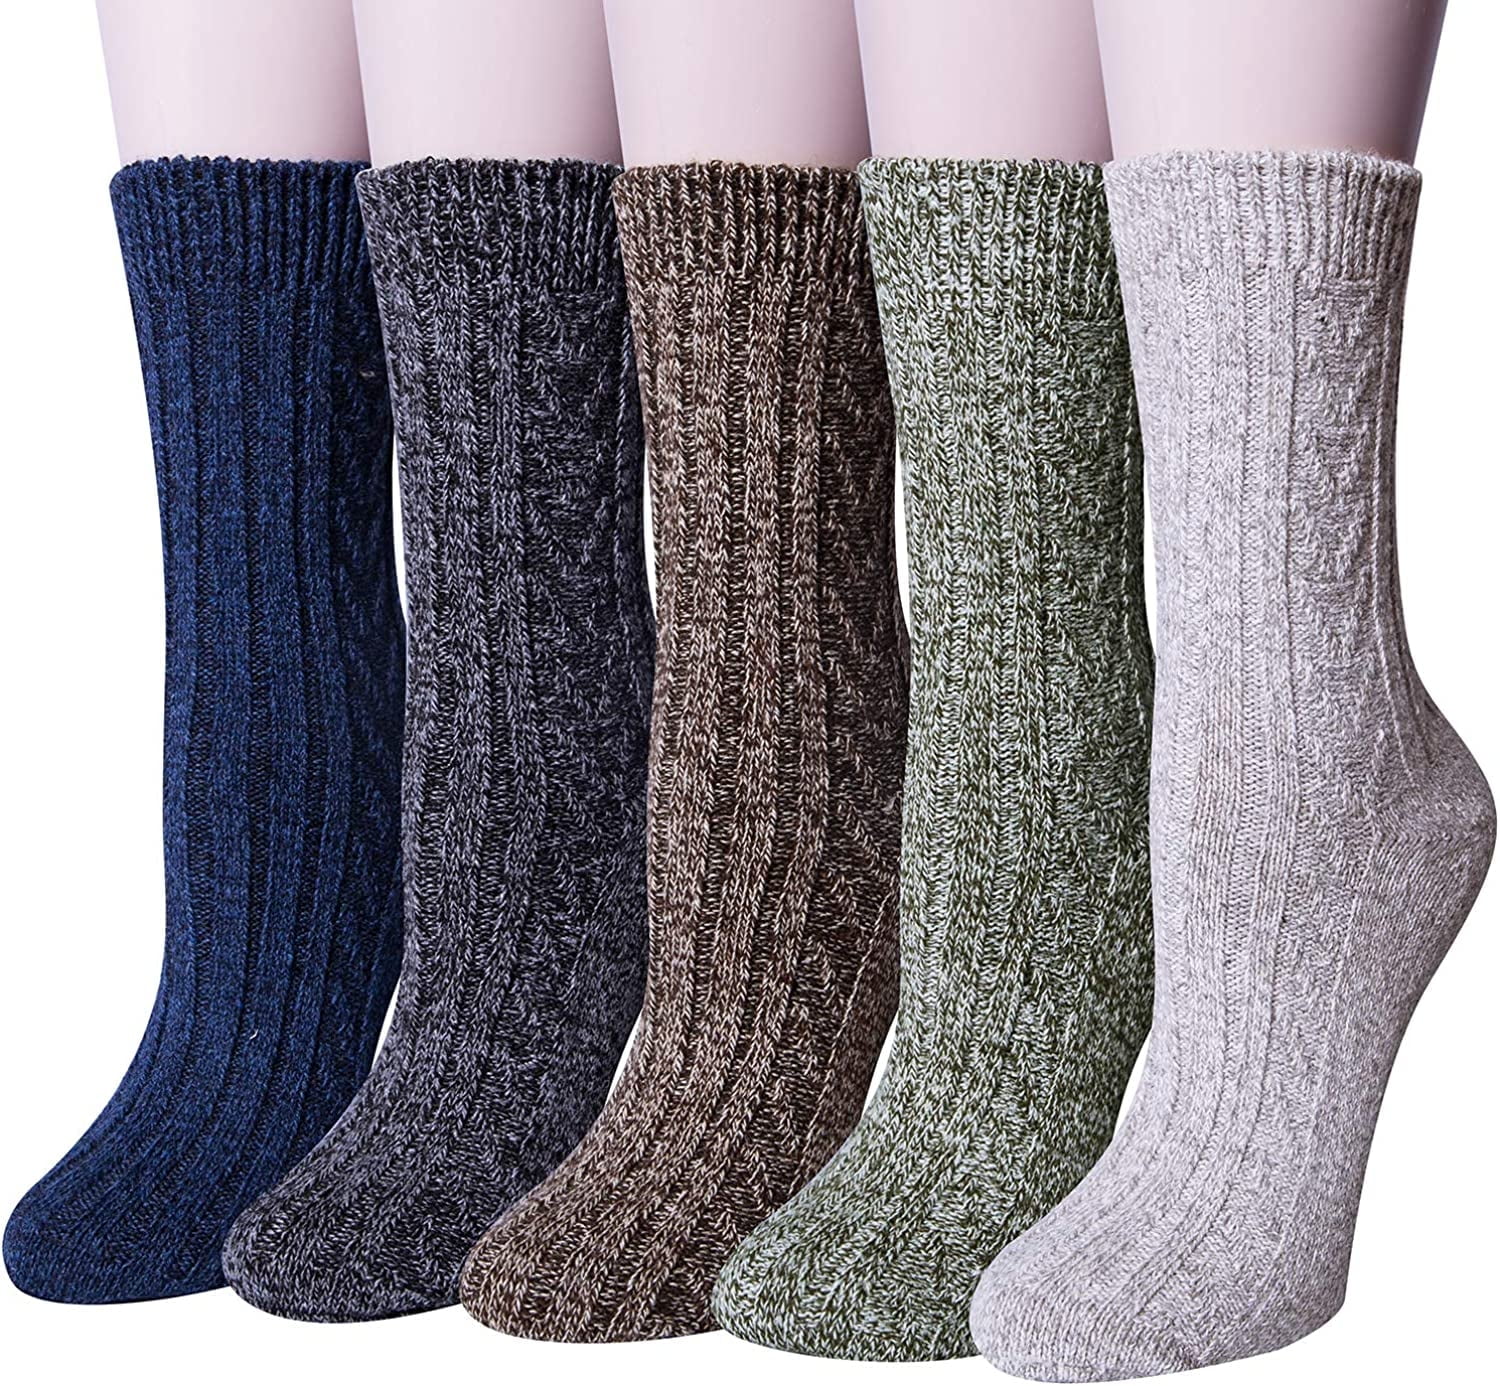 Loritta 5 Pairs Warm Wool Socks for Women, Thick Knit Thermal Crew